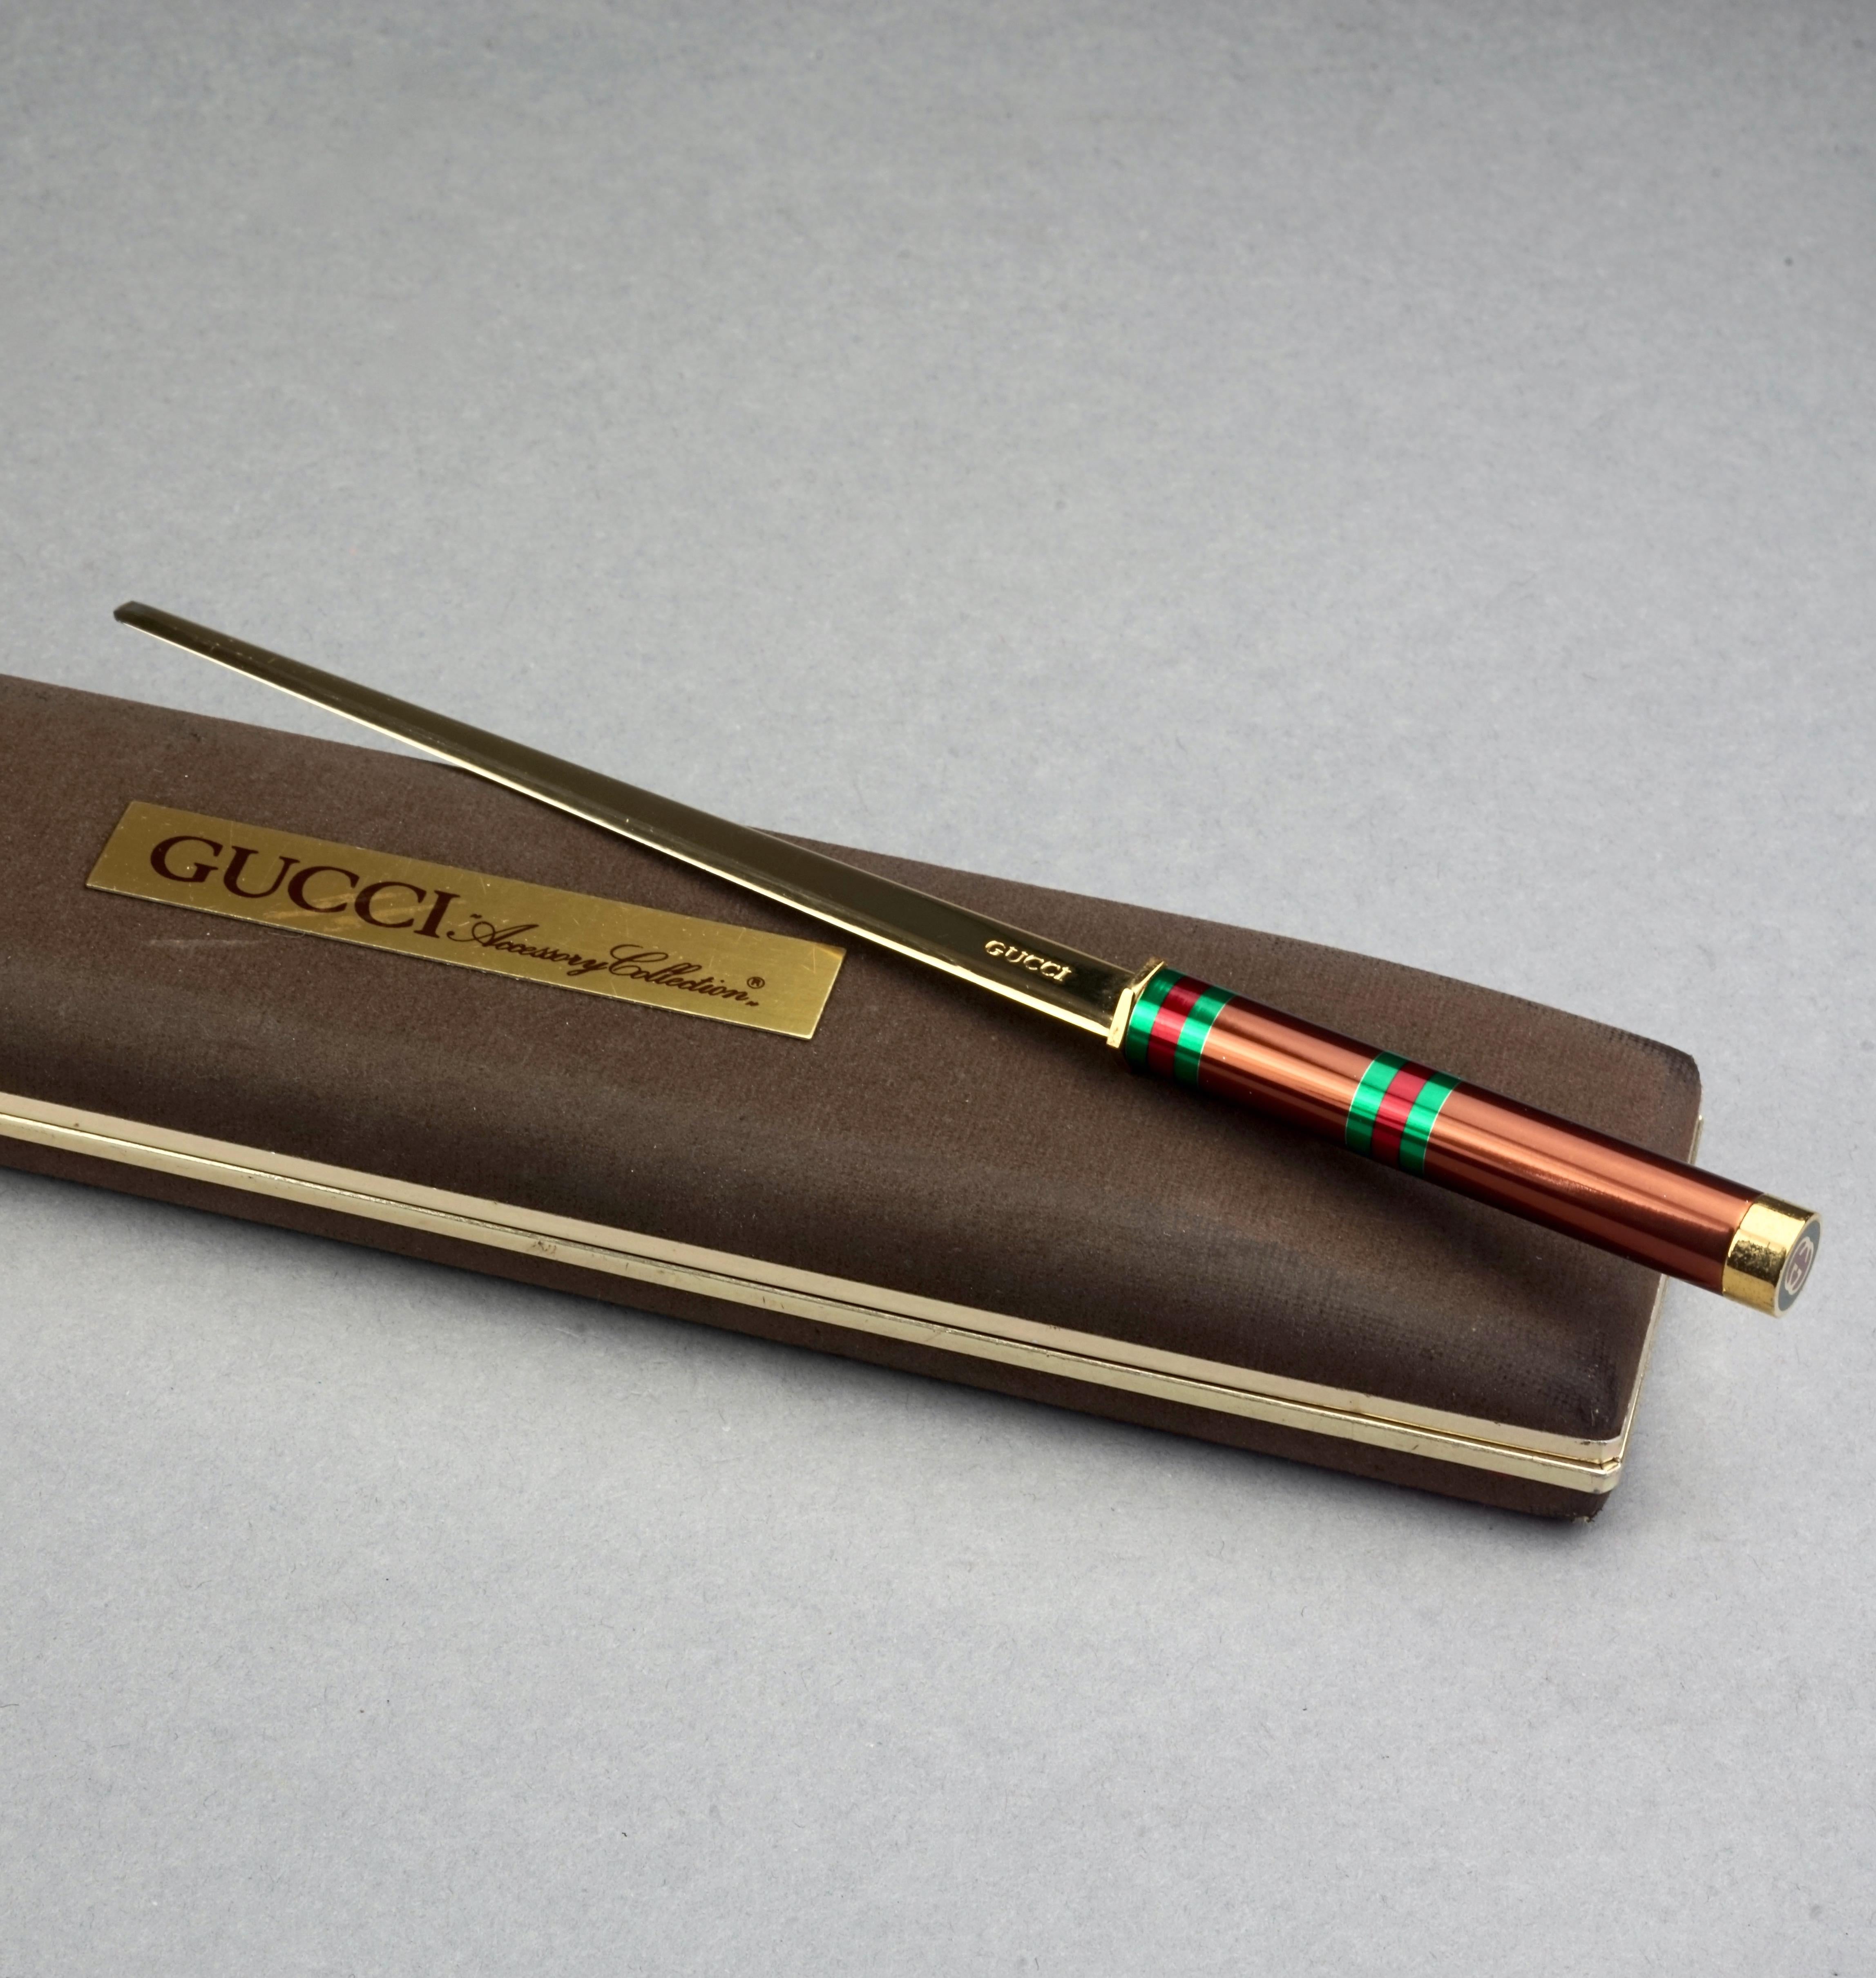 Vintage Iconic GUCCI Logo Enamel Letter Opener

Measurements:
Diameter: 0.39 inch (1 cm)
Length: 7.28 inches (18.5 cm)

Features:
- 100% Authentic GUCCI.
- Iconic enamel Gucci letter opener.
- Classic GUCCI green and red stripe on brown